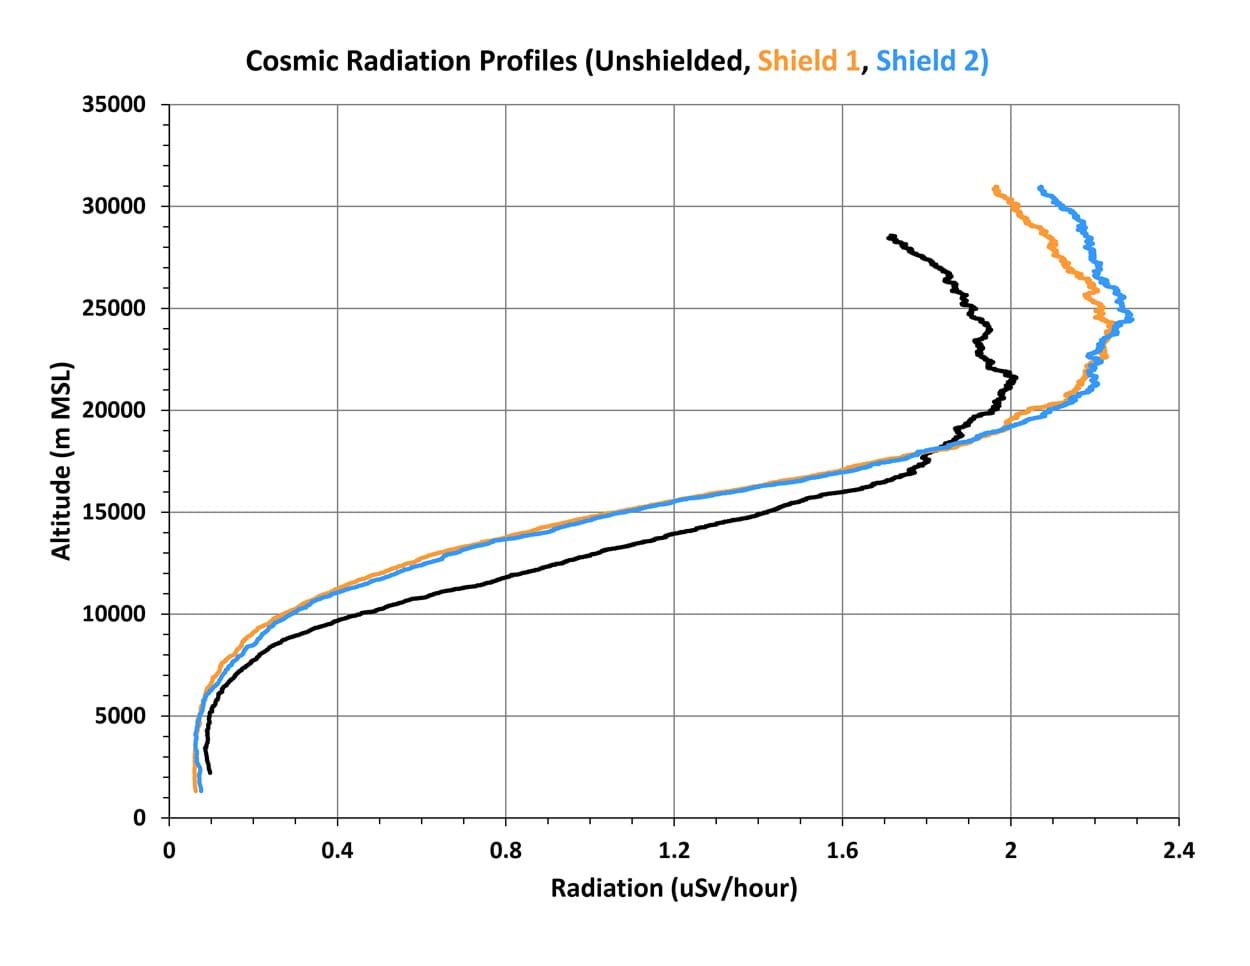 This figure shows how the cosmic radiation measurements from a previous balloon flight changed with altitude, both for shielded payloads as well as unshielded payloads. The shielded payloads actually produced higher radiation measurements above about 20 km above sea level.